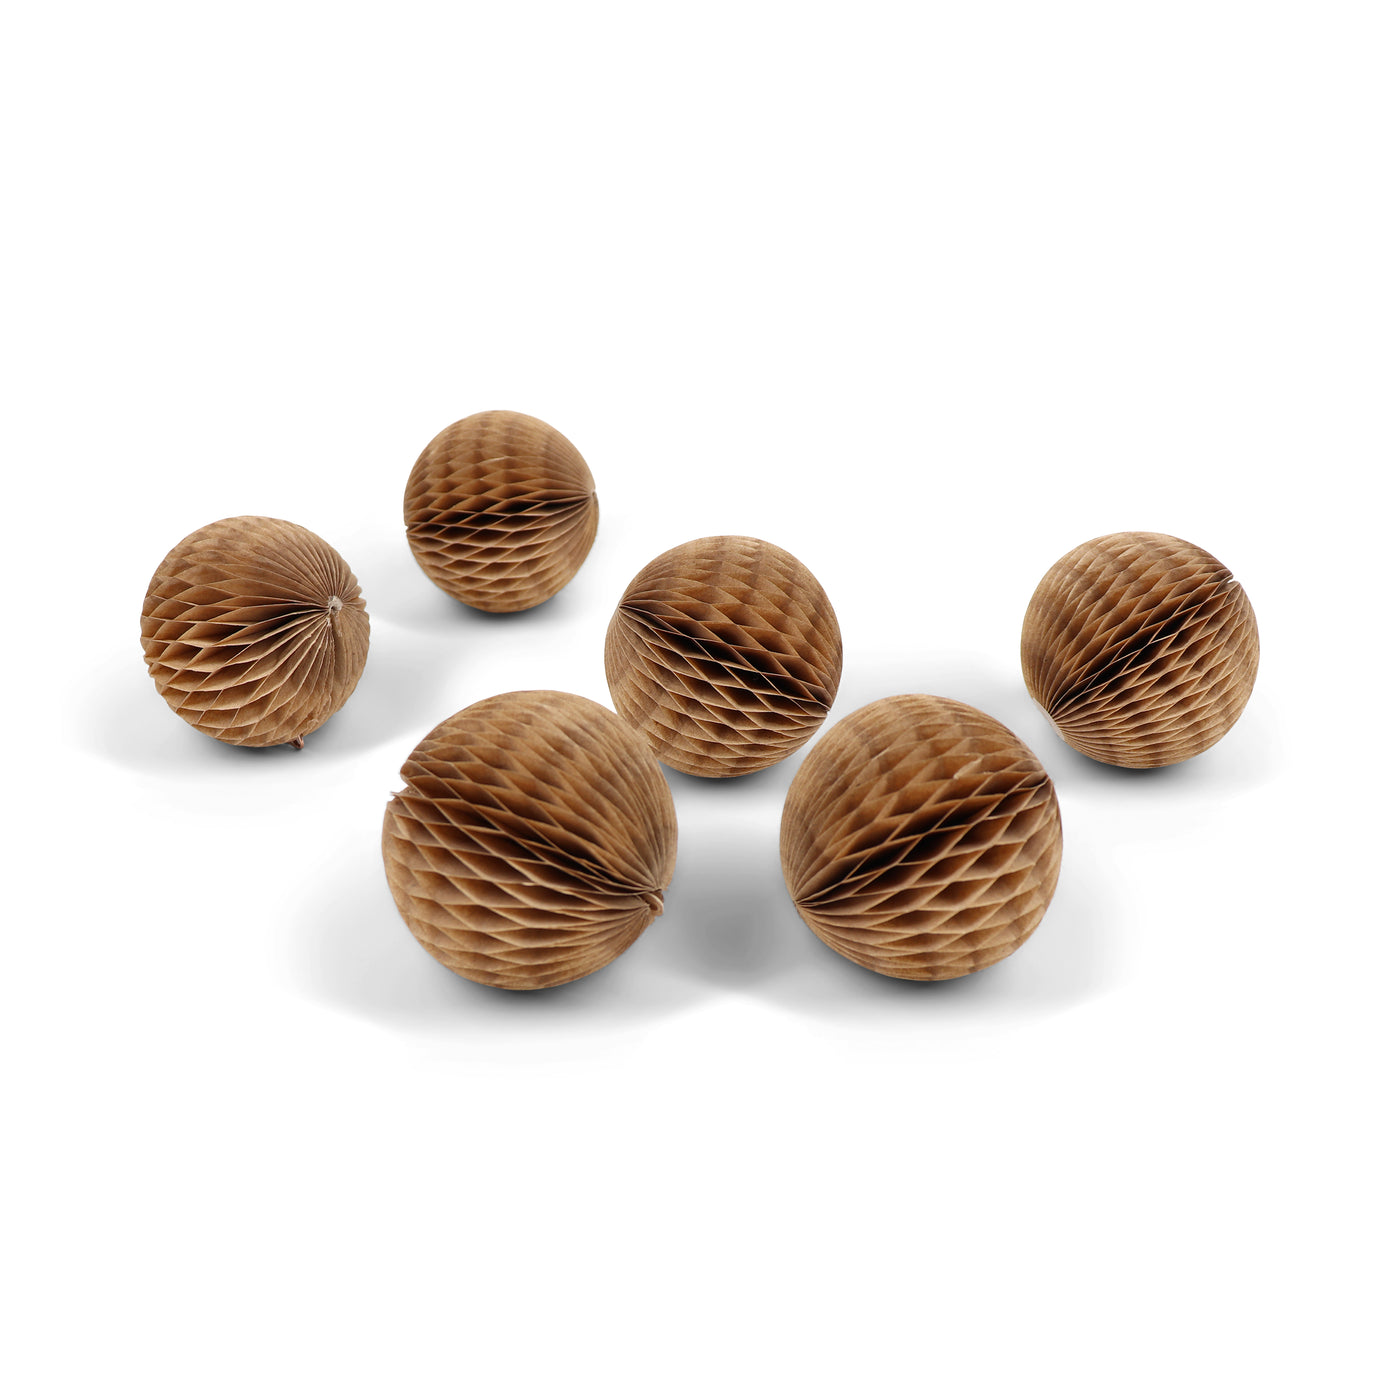 Honeycomb Ball 5cm  Pack of 6